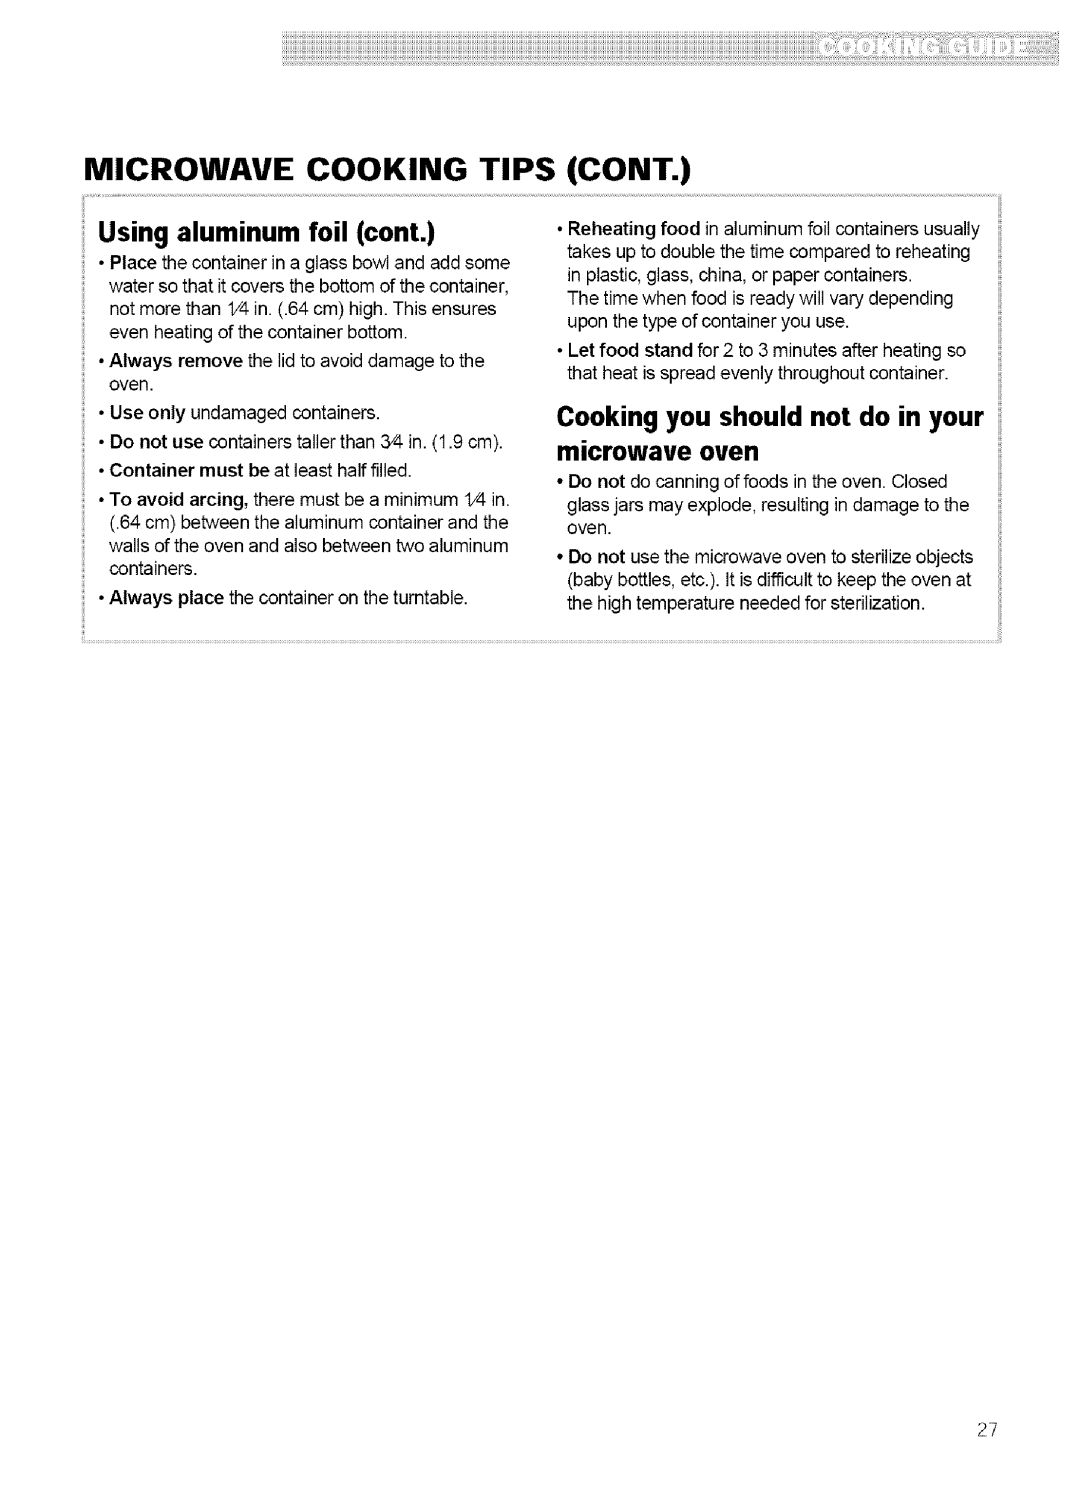 Kenmore 721.62759 Microwave Cooking Tips Cont, Using aluminum foil cont, Cooking you should not do in your microwave oven 